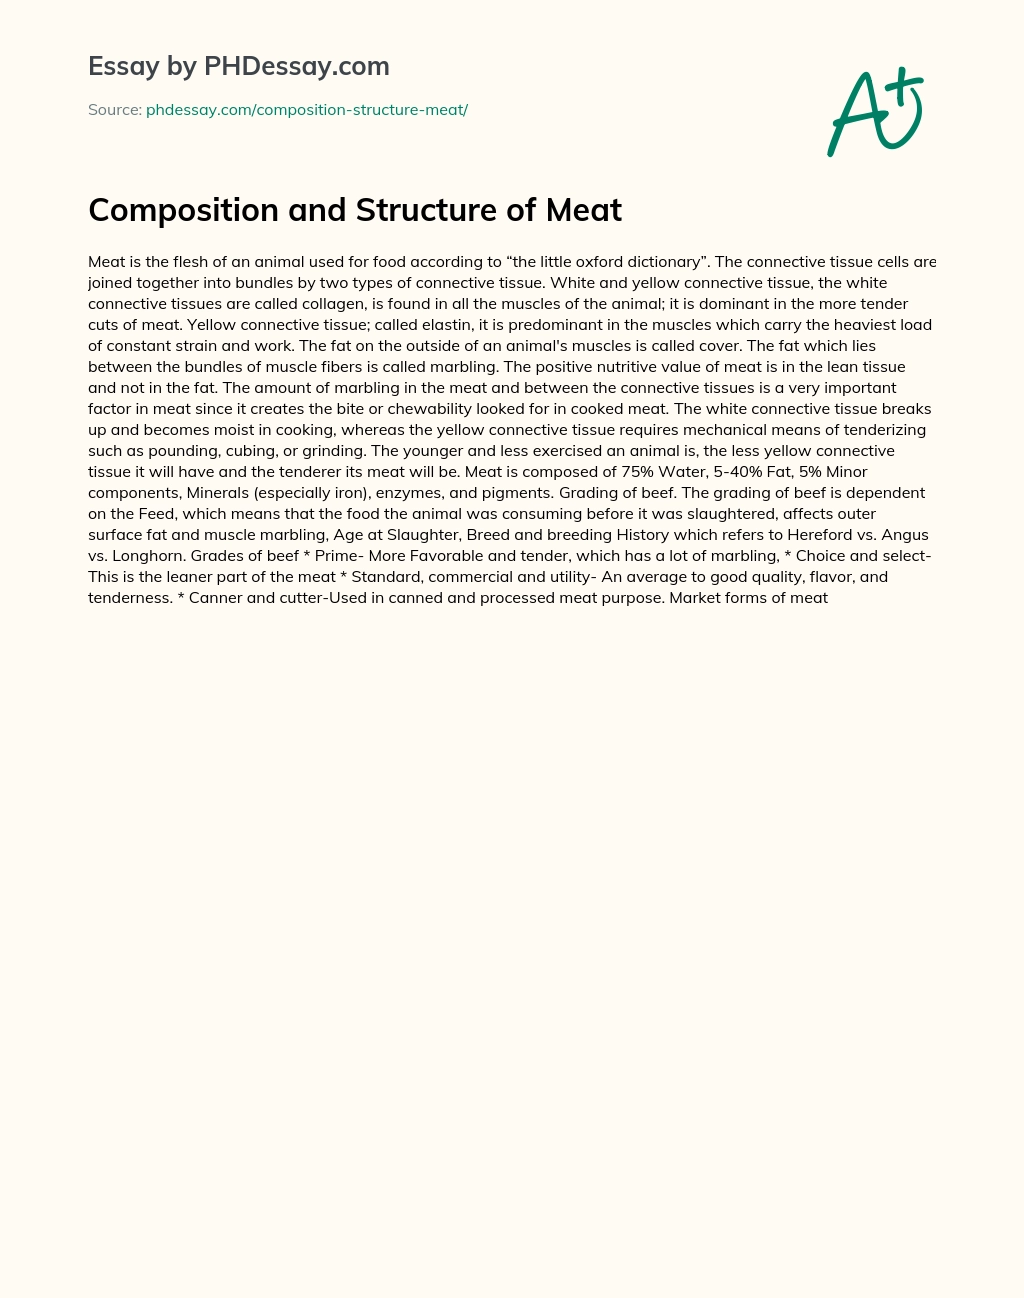 Composition and Structure of Meat essay